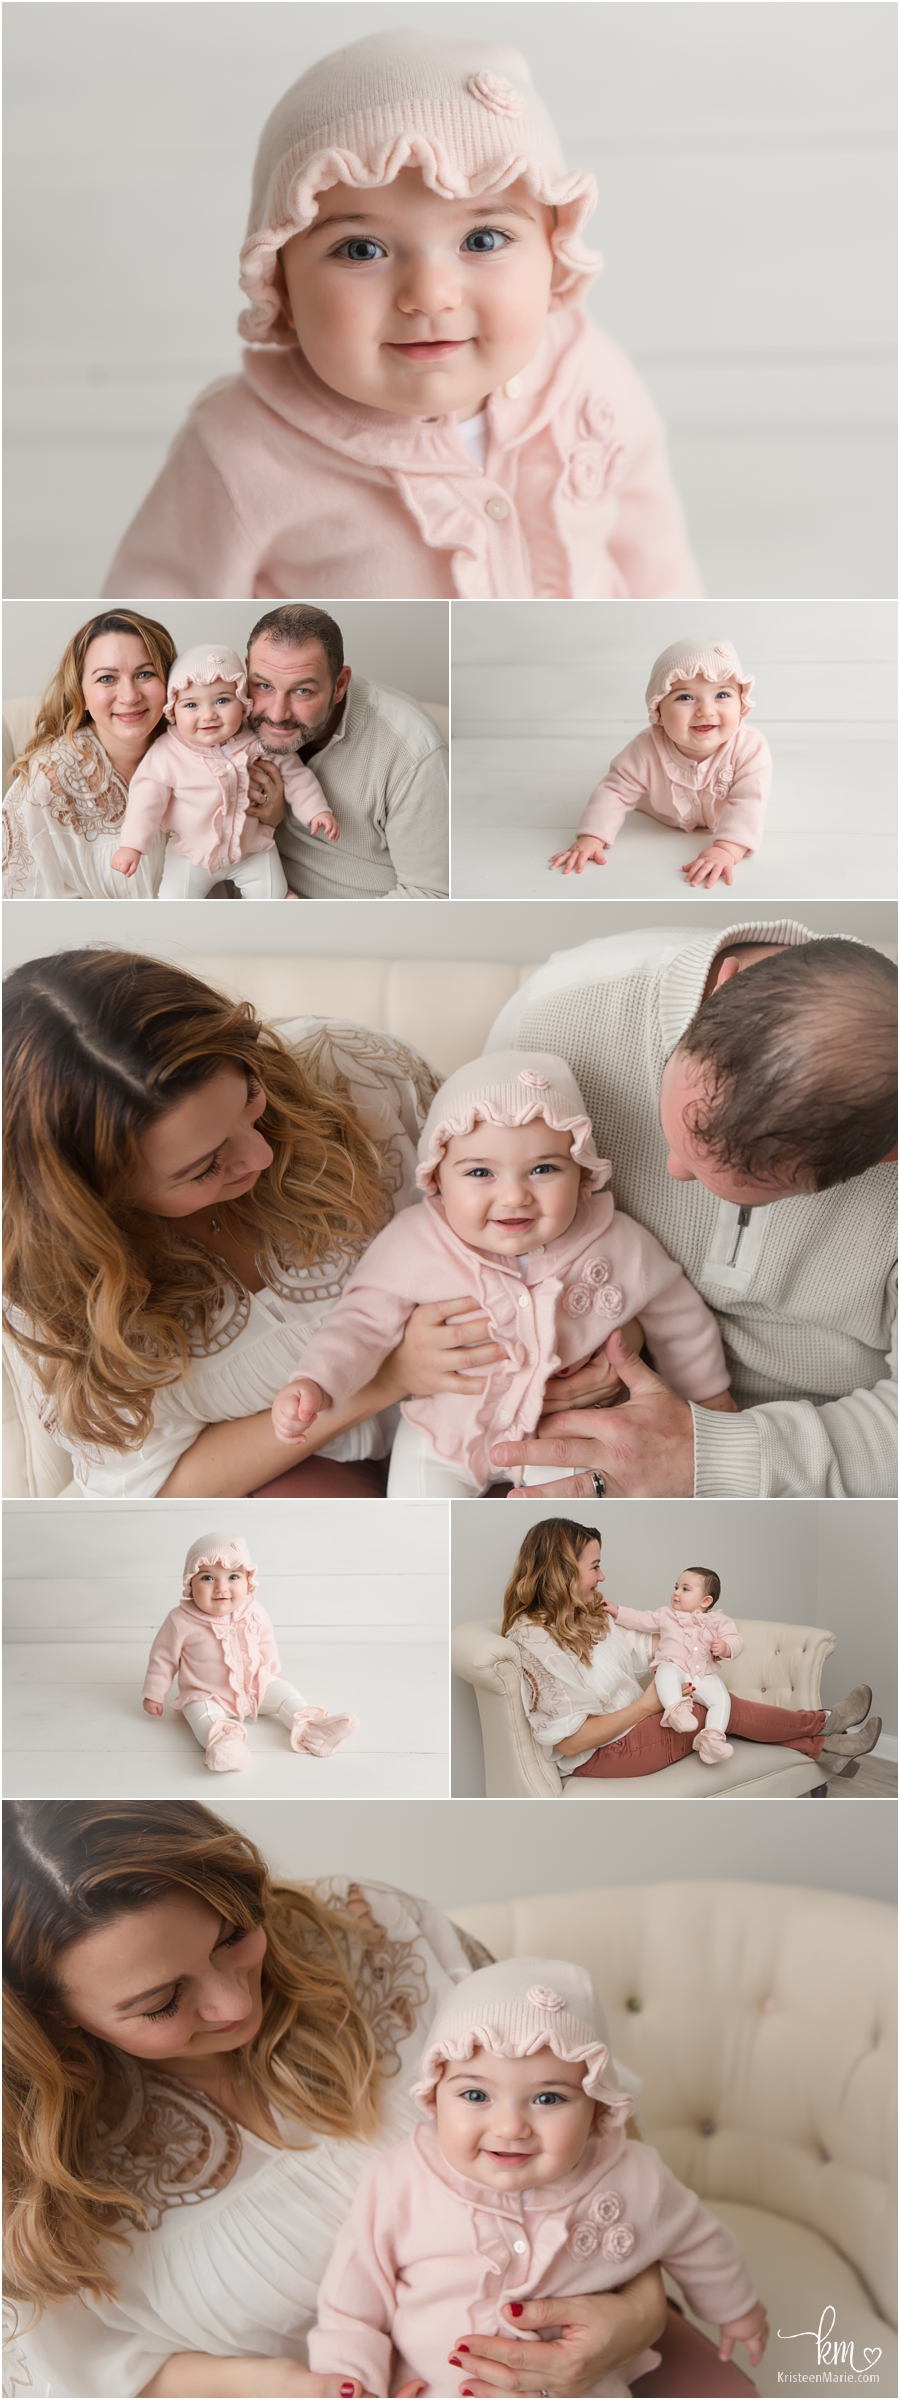 Sitter session poses - baby and family